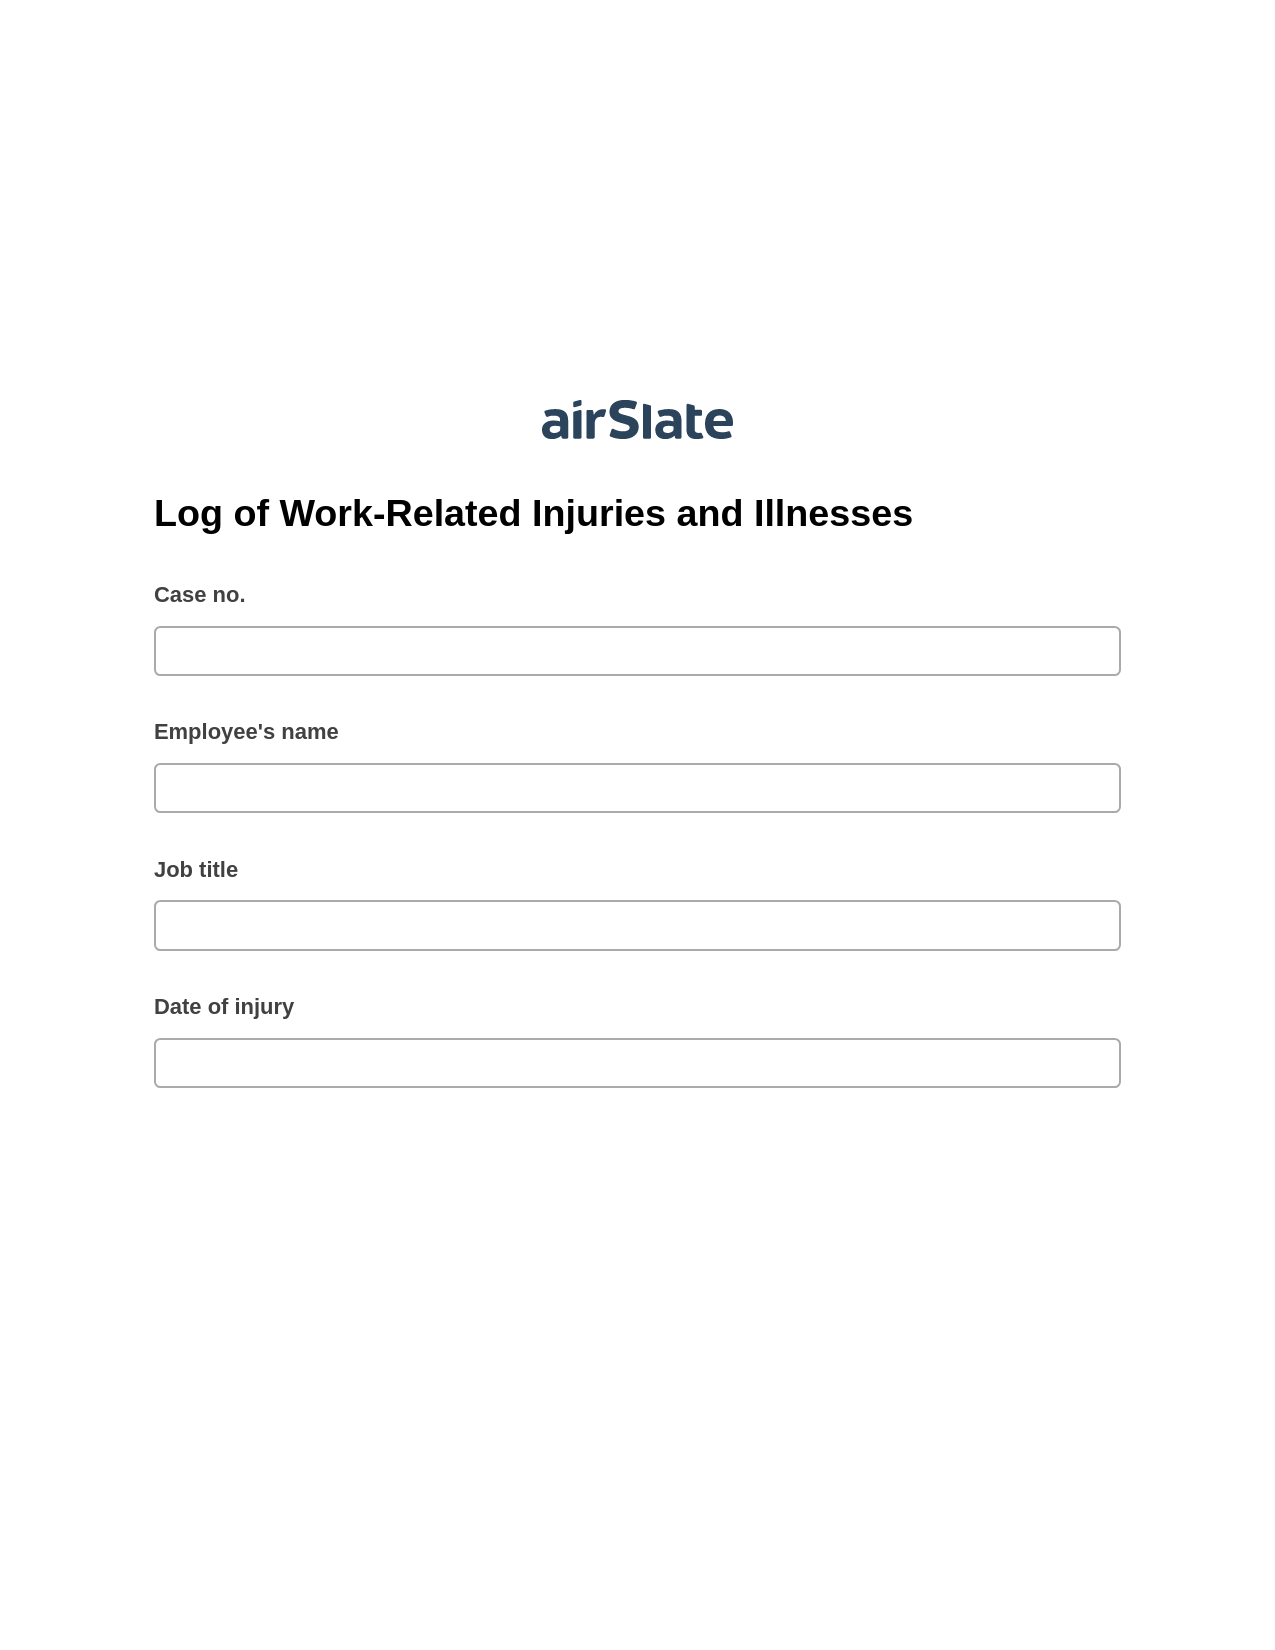 Multirole Log of Work-Related Injuries and Illnesses Pre-fill Dropdowns from Office 365 Excel Bot, Create slate addon, Export to Formstack Documents Bot